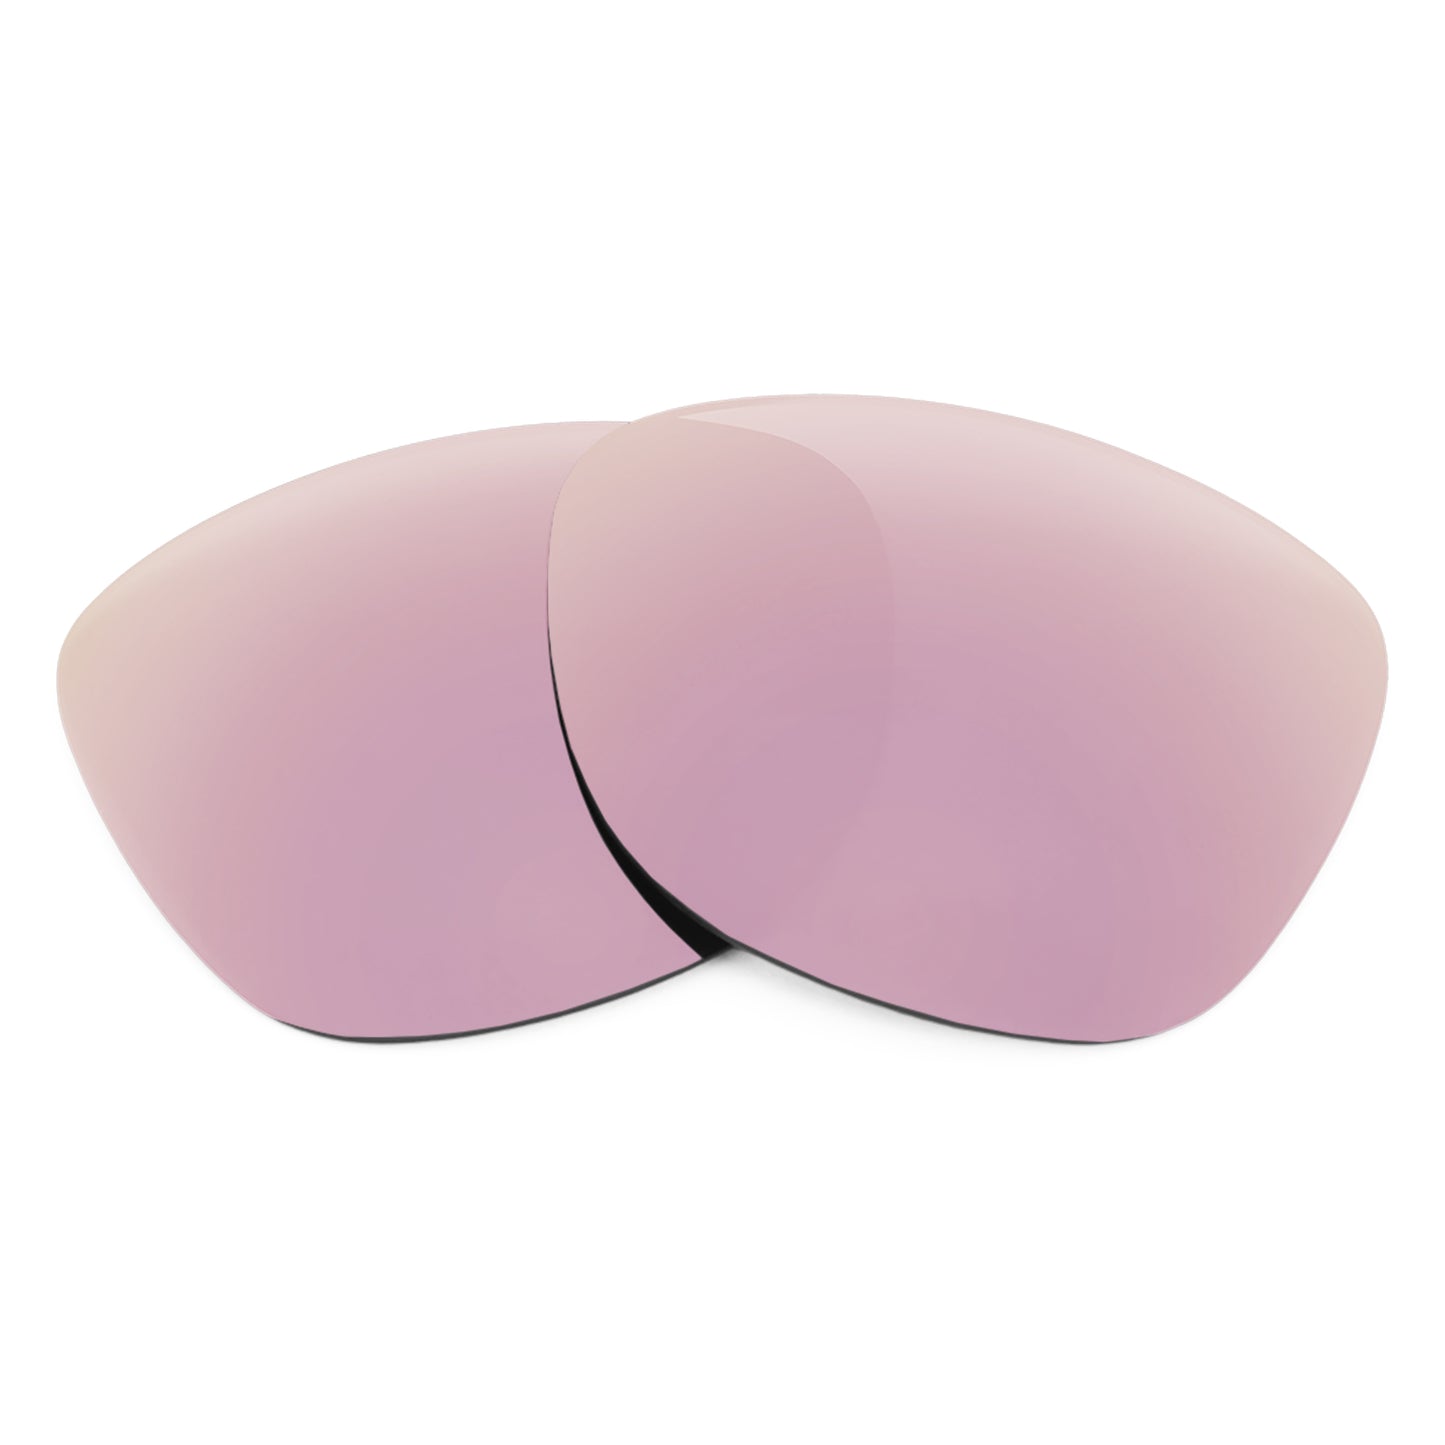 Revant replacement lenses for Ray-Ban Justin Classic RB4165 55mm Elite Polarized Rose Gold